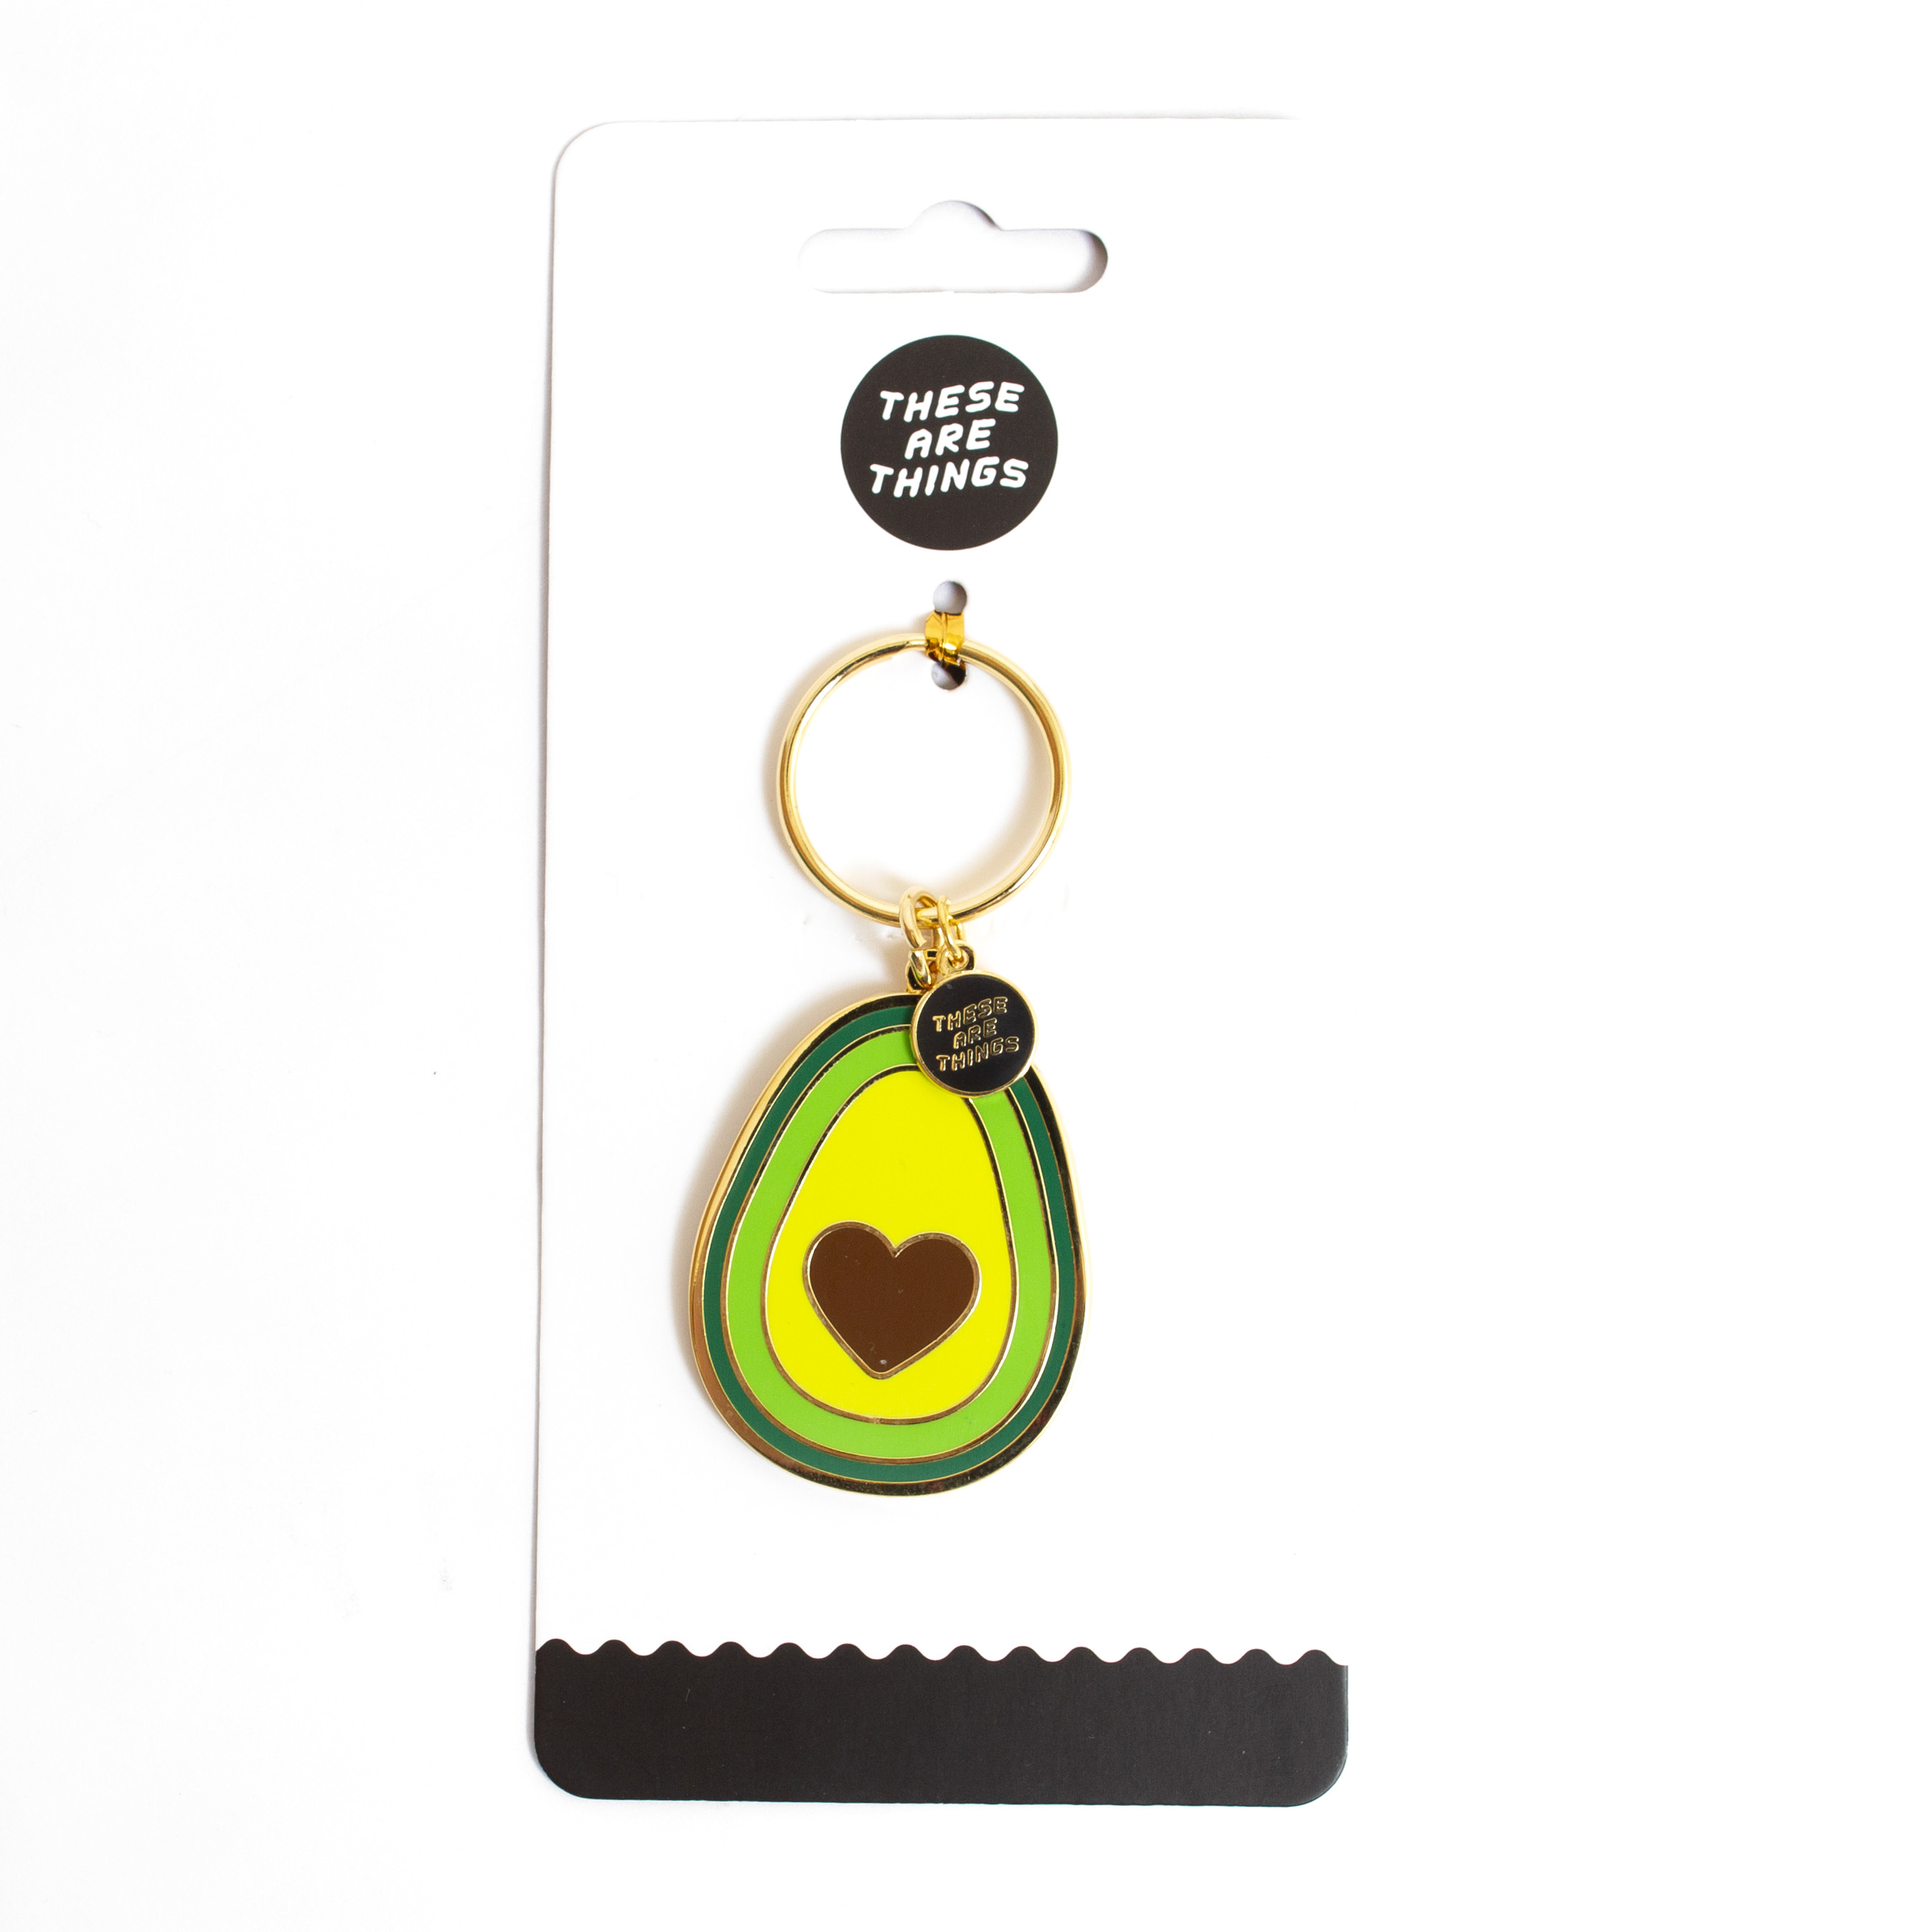 These Are Things, Enamel, Keychain, Avocado